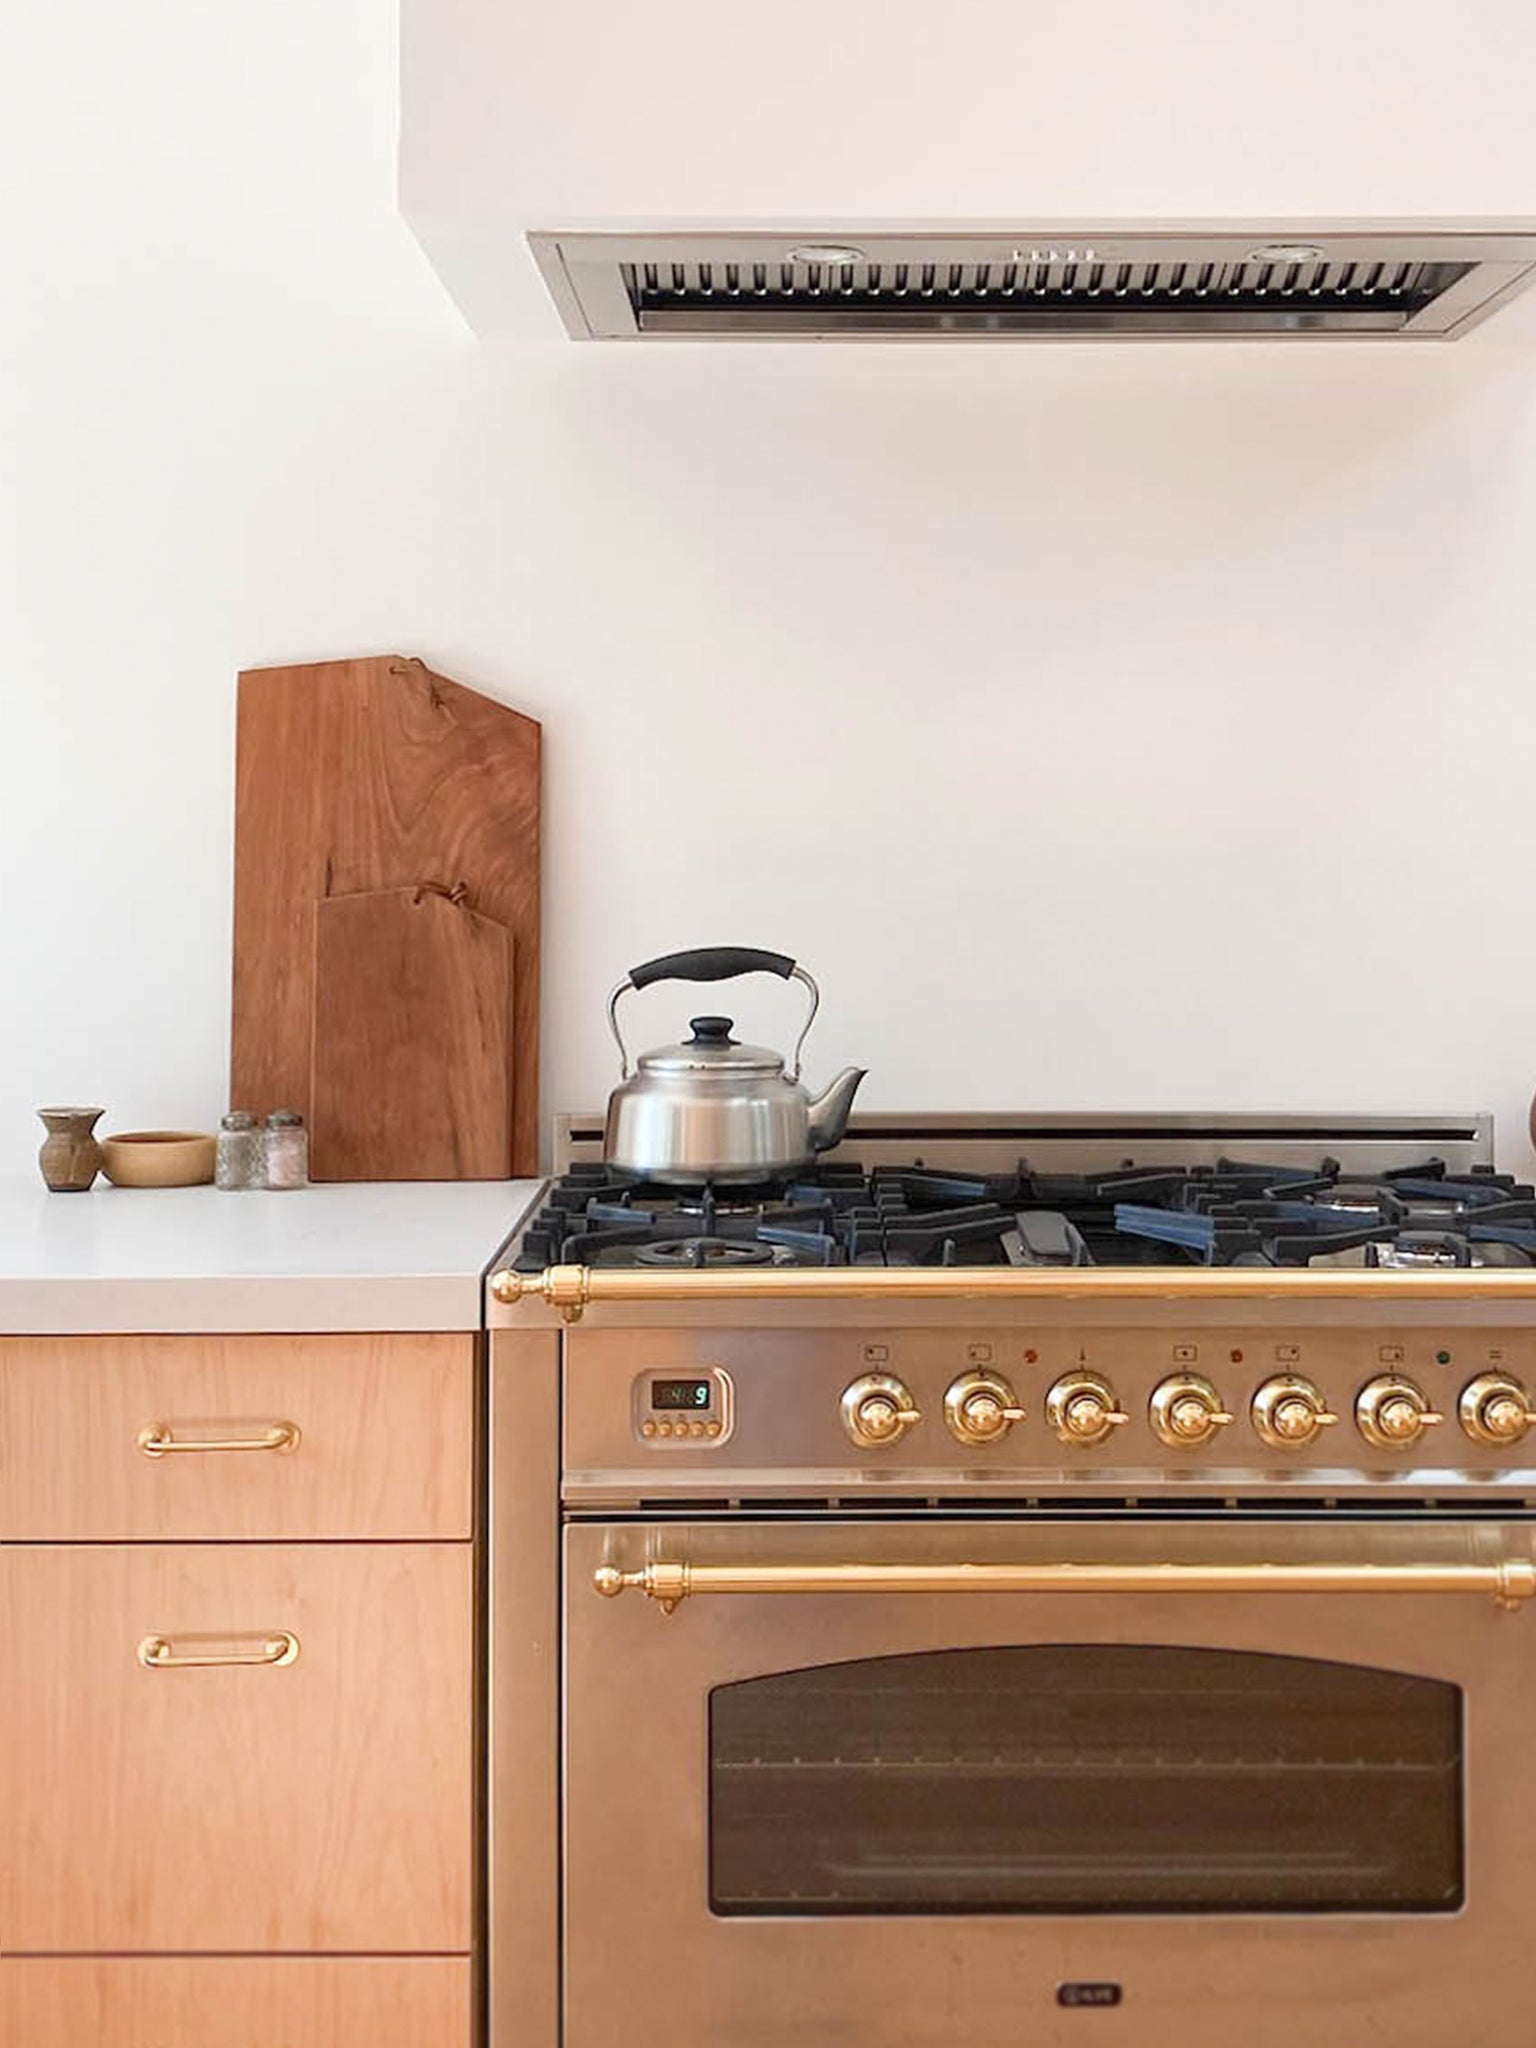 Stainless Kettle on stove with cabinets and range hood | lifestyle